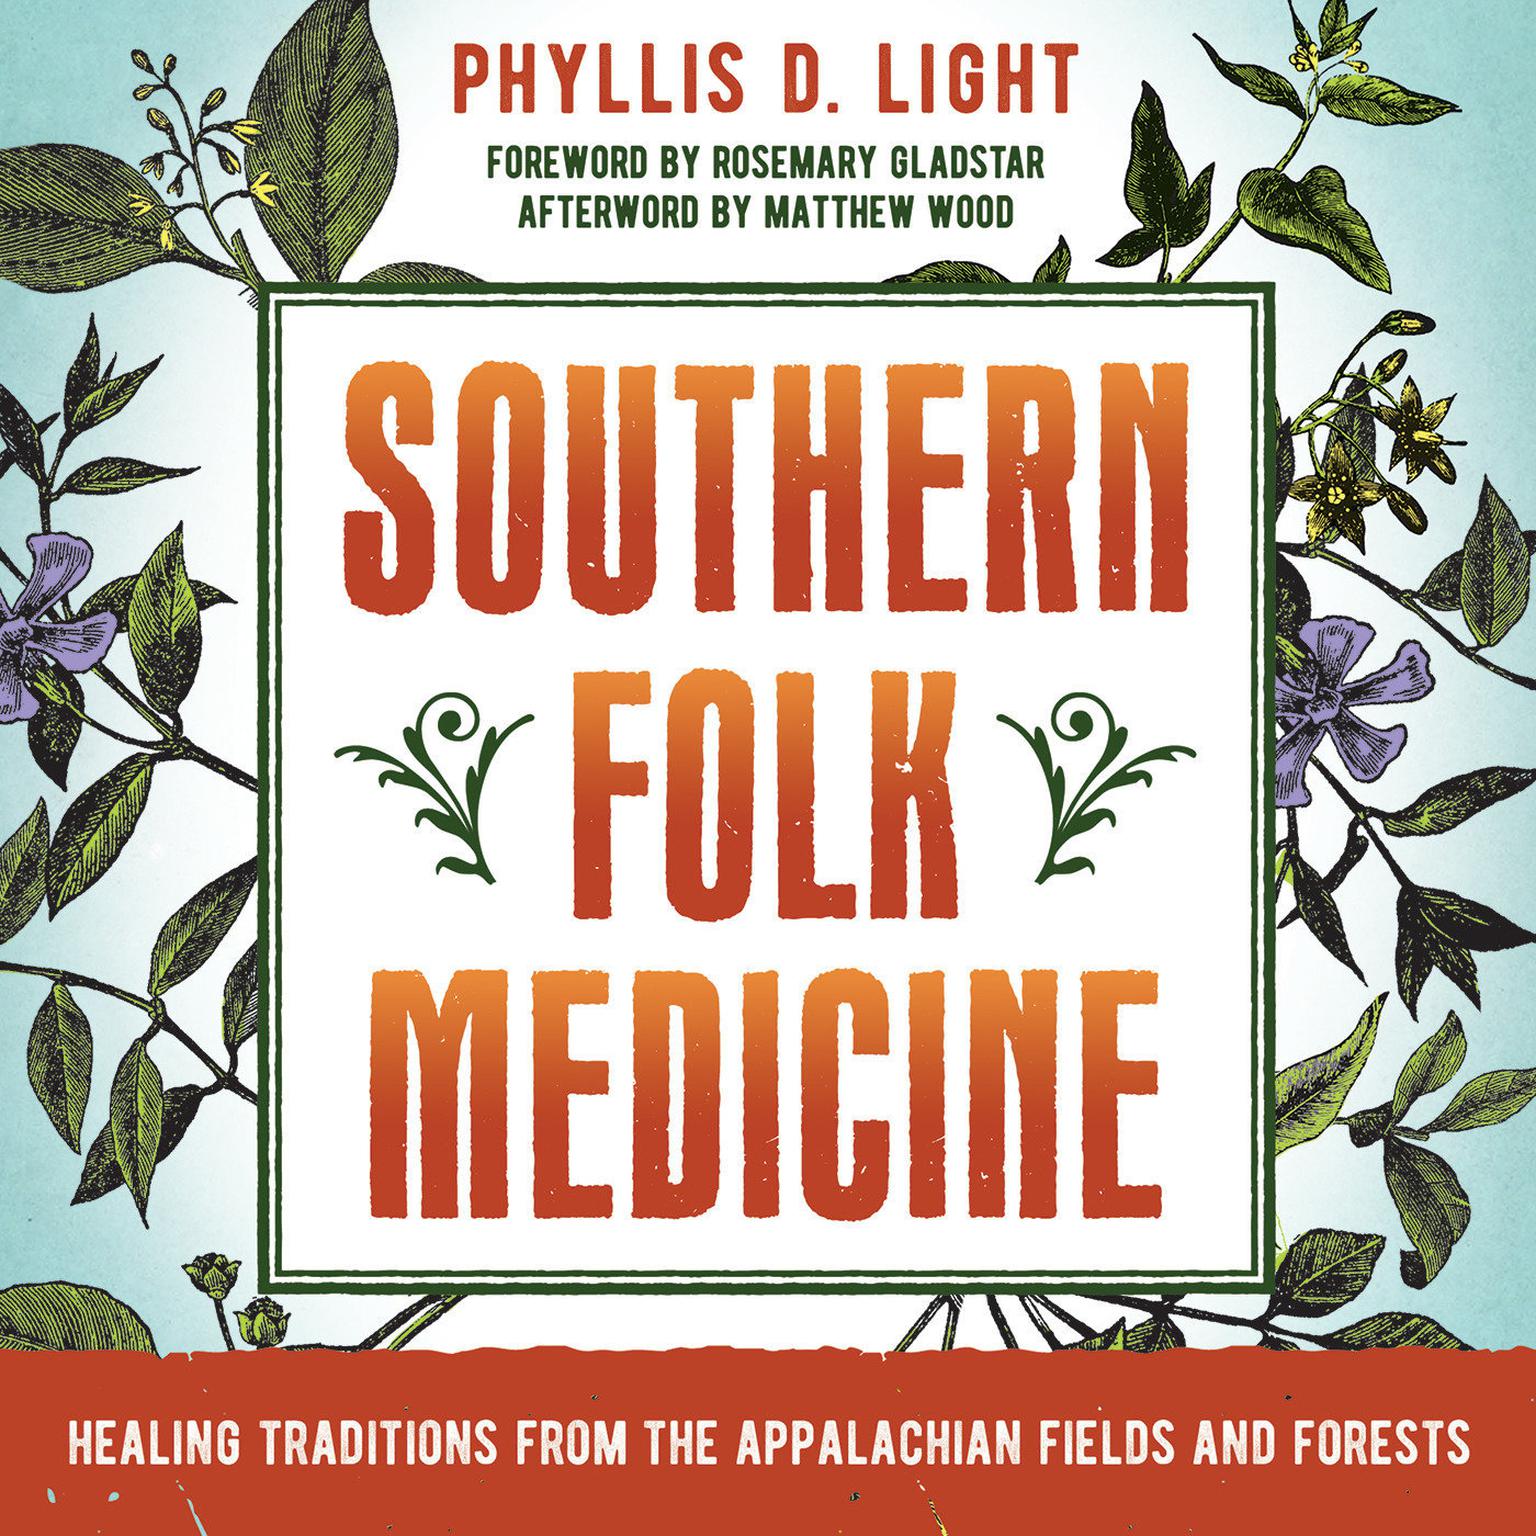 Southern Folk Medicine: Healing Traditions from the Appalachian Fields and Forests Audiobook, by Phyllis D. Light